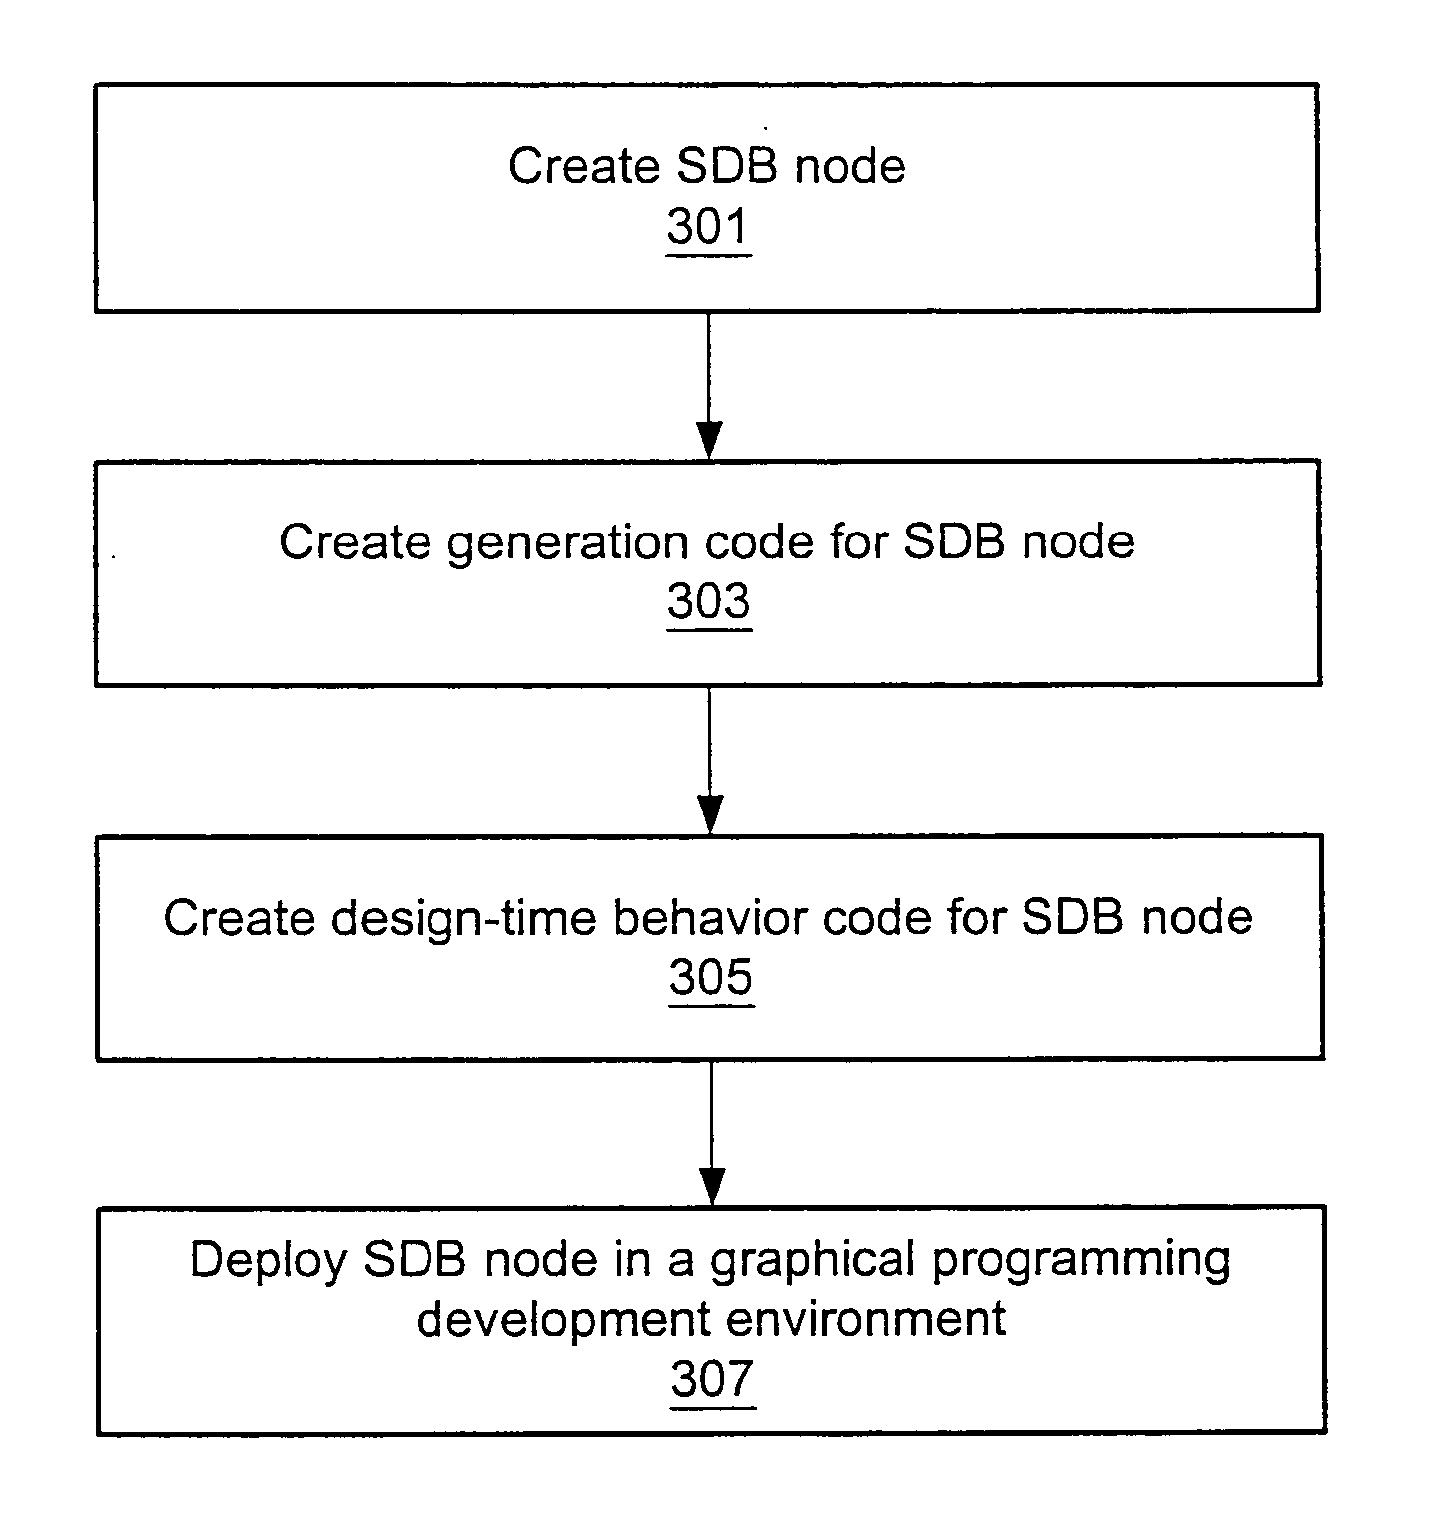 Static binding of nodes to virtual instruments in a graphical program